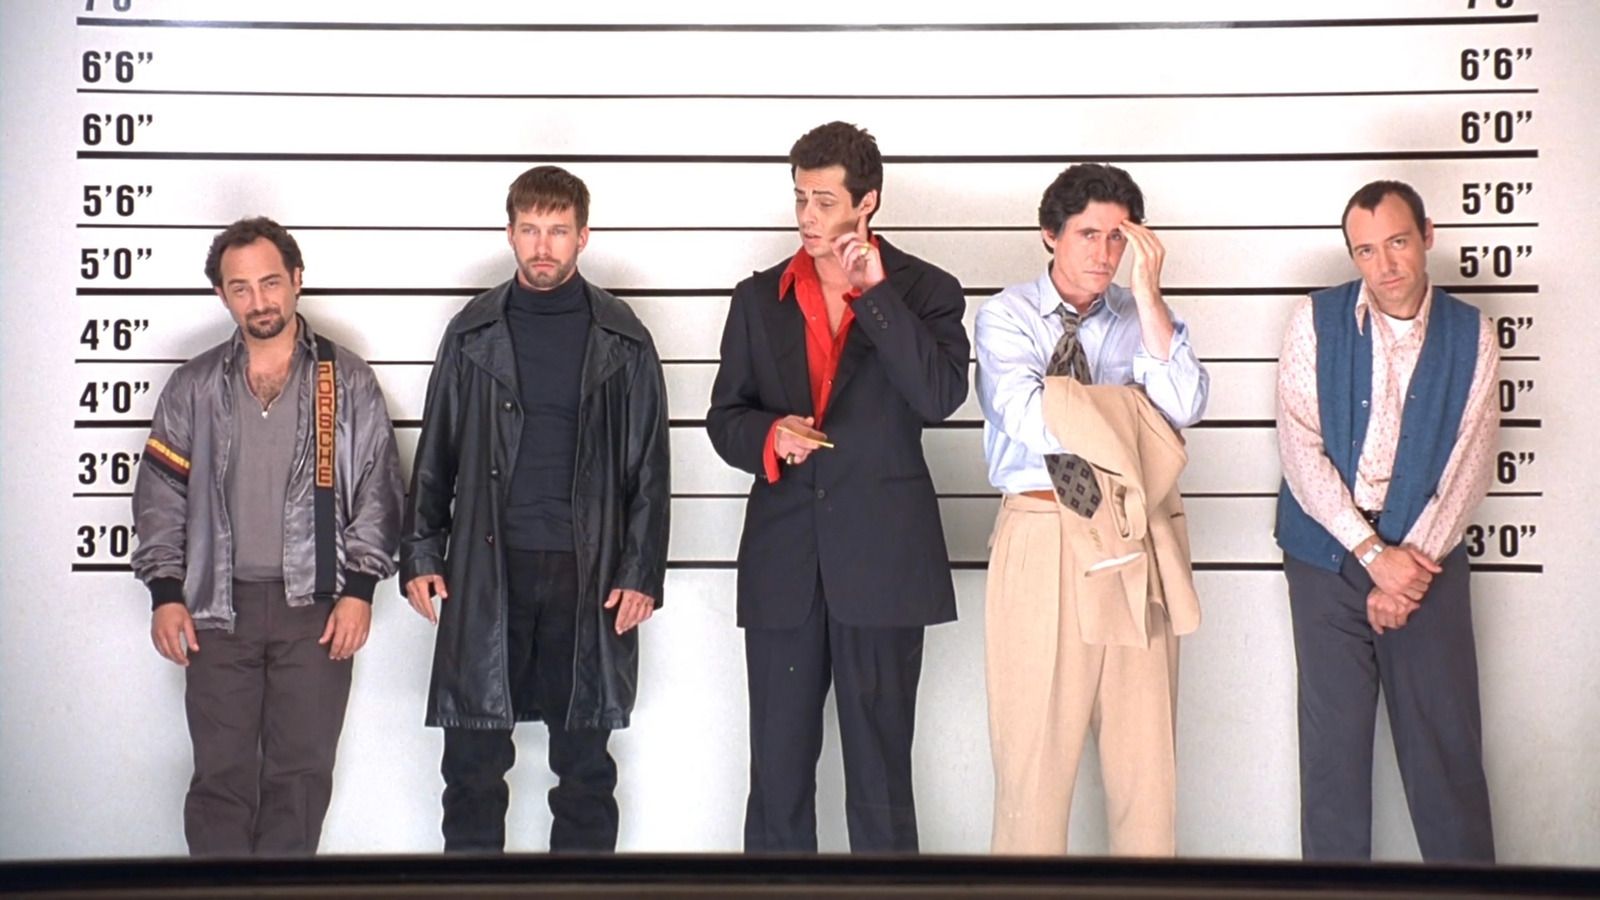 In The Usual Suspects(1995), Bryan Singer convinced every one of